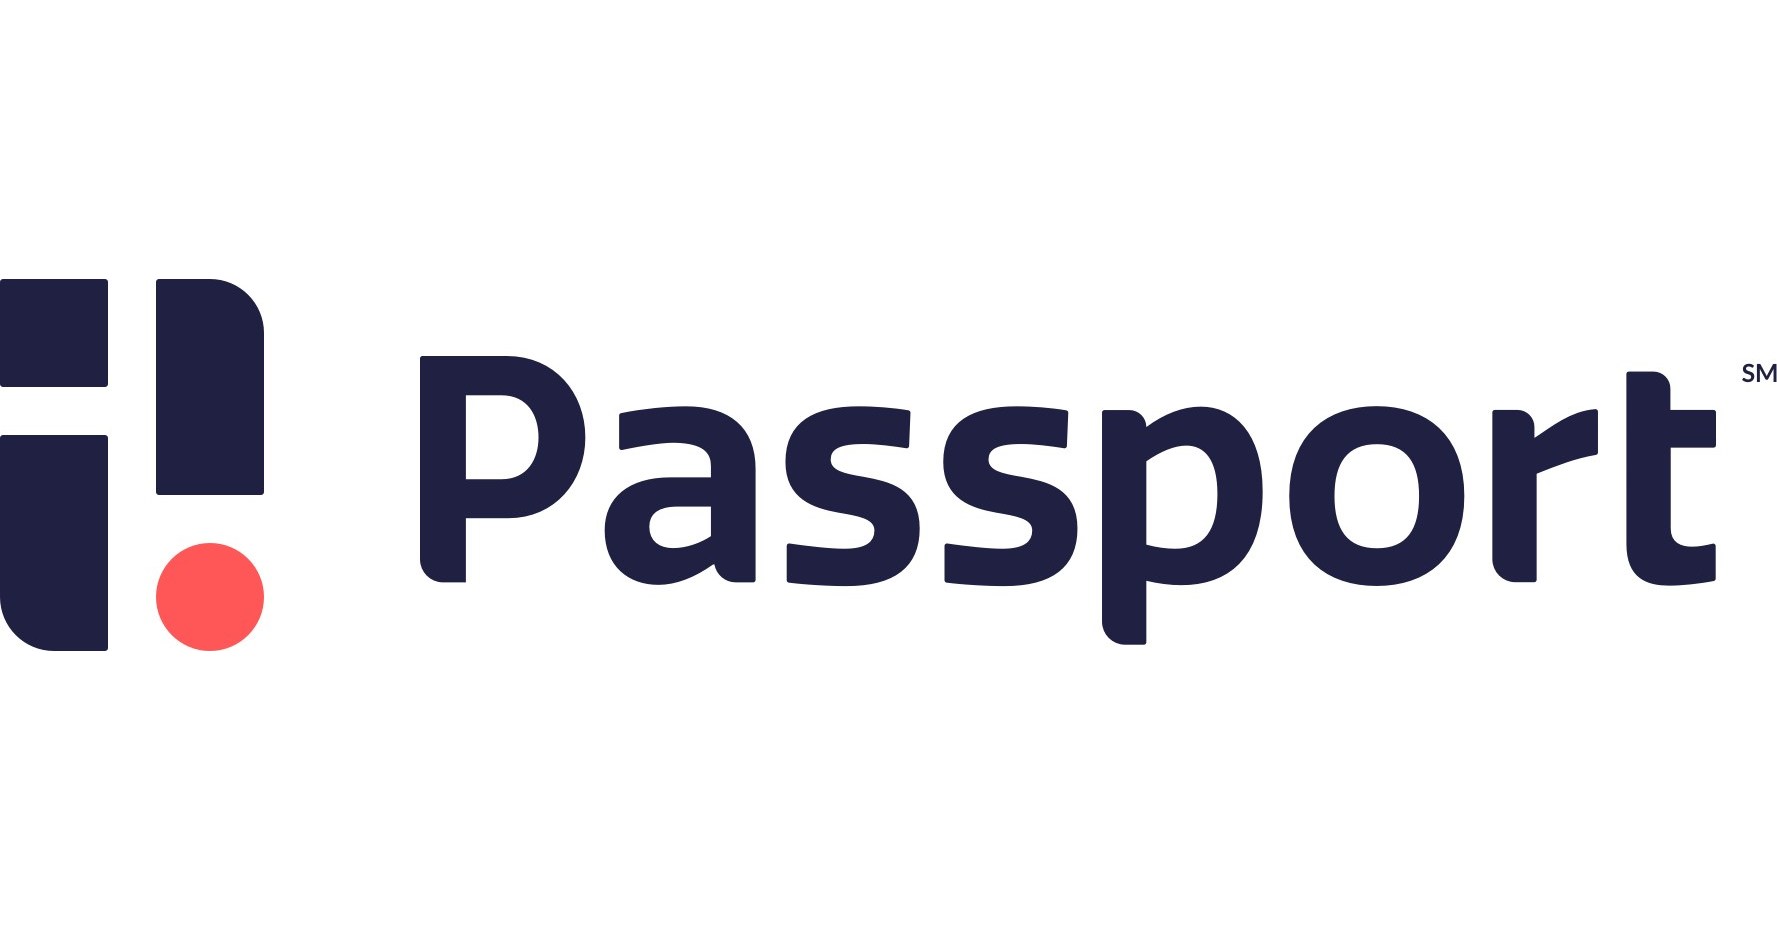  Passport digitizes parking and mobility management in Highland Park 